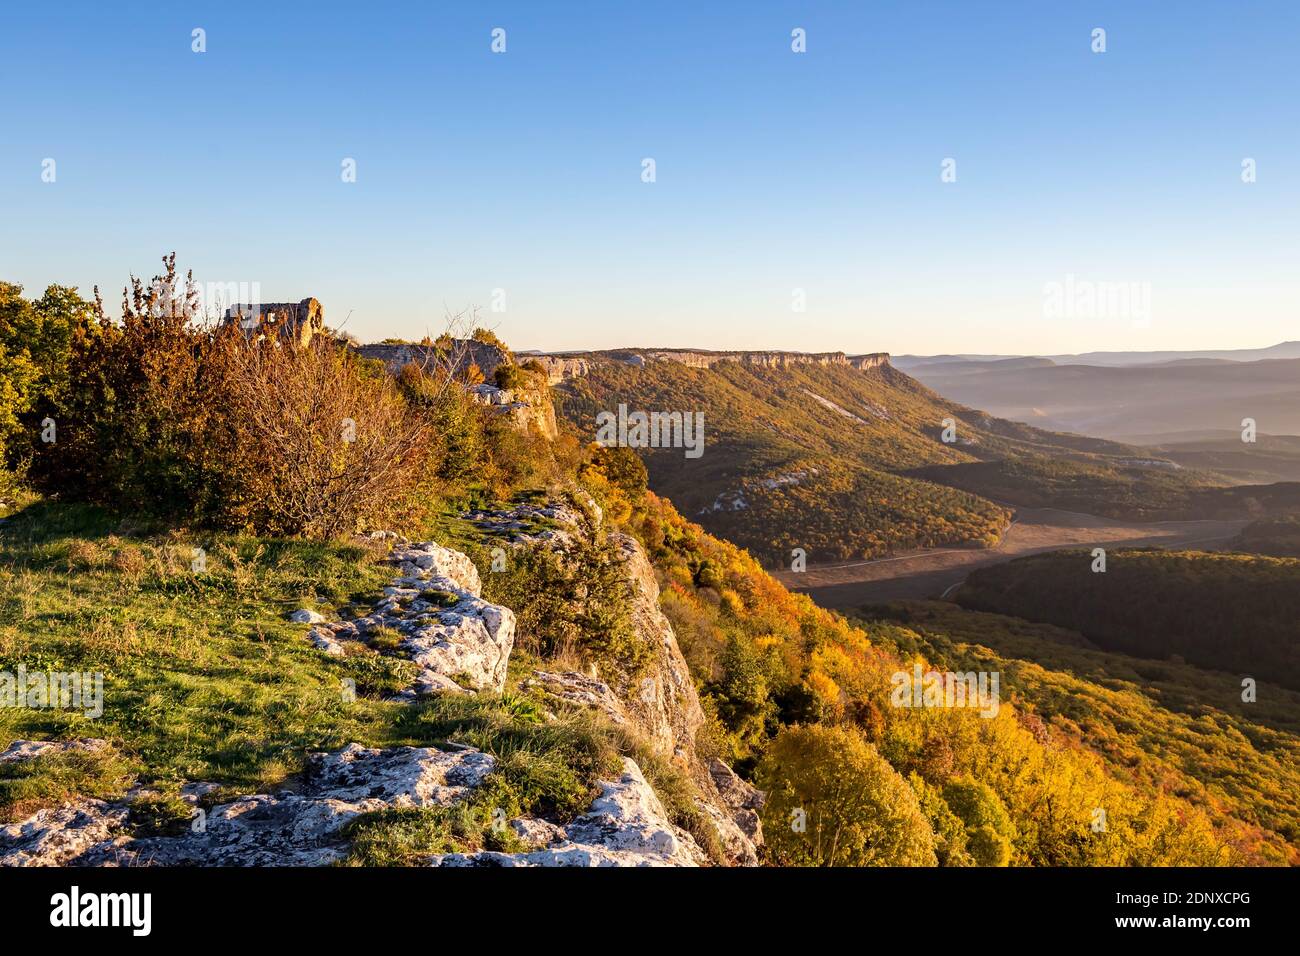 Scenic View Of Landscape Against Clear Sky Stock Photo